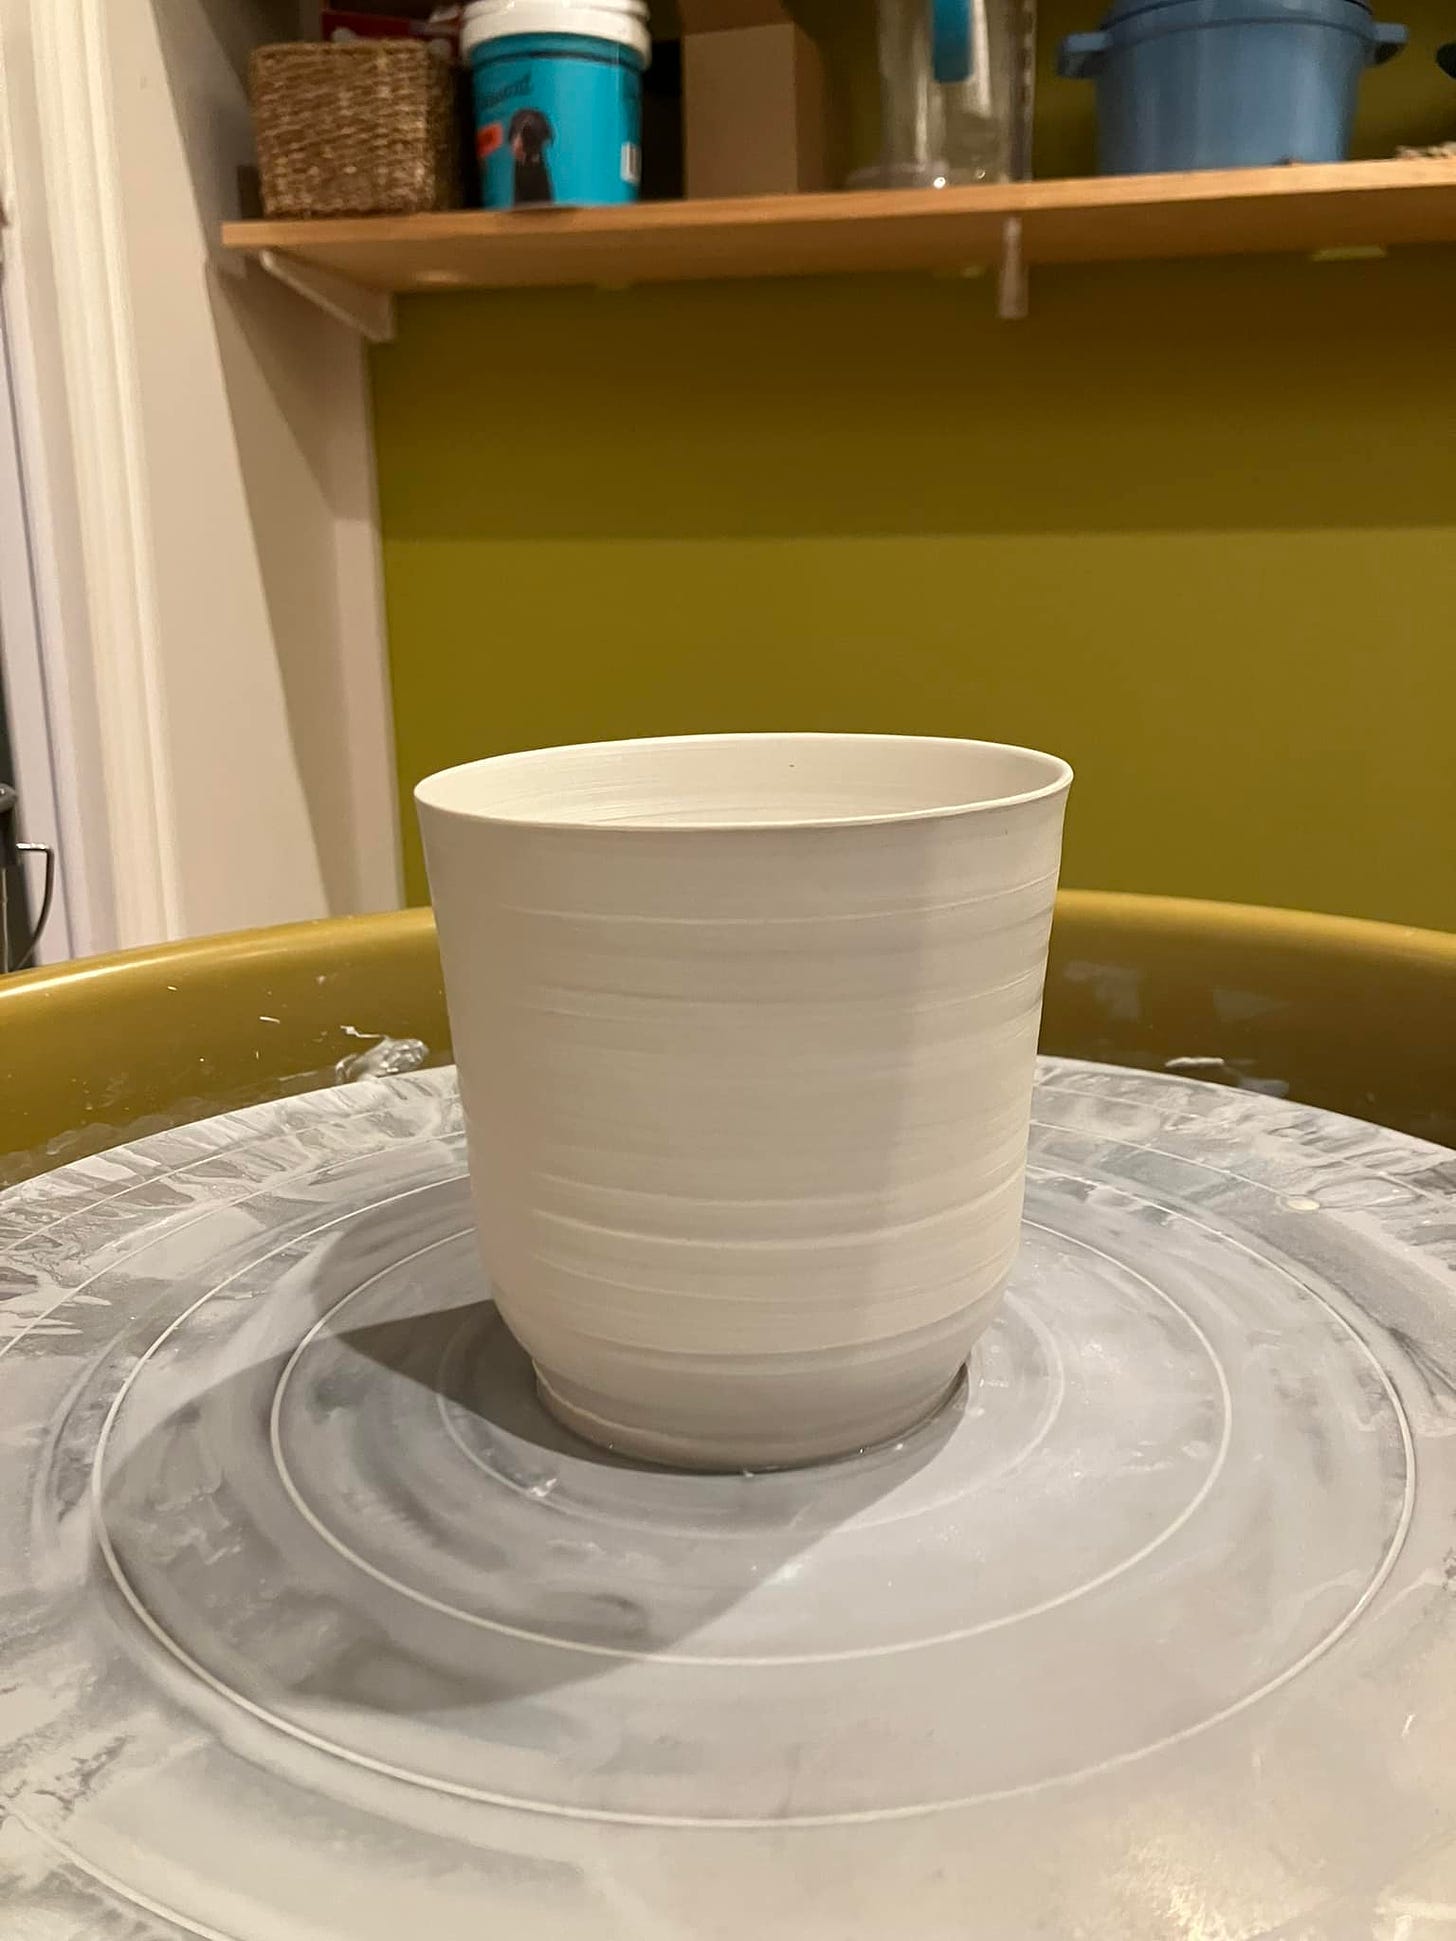 A new porcelain cup, still on the wheel. In the background is a lemongrass wall and pine shelves.